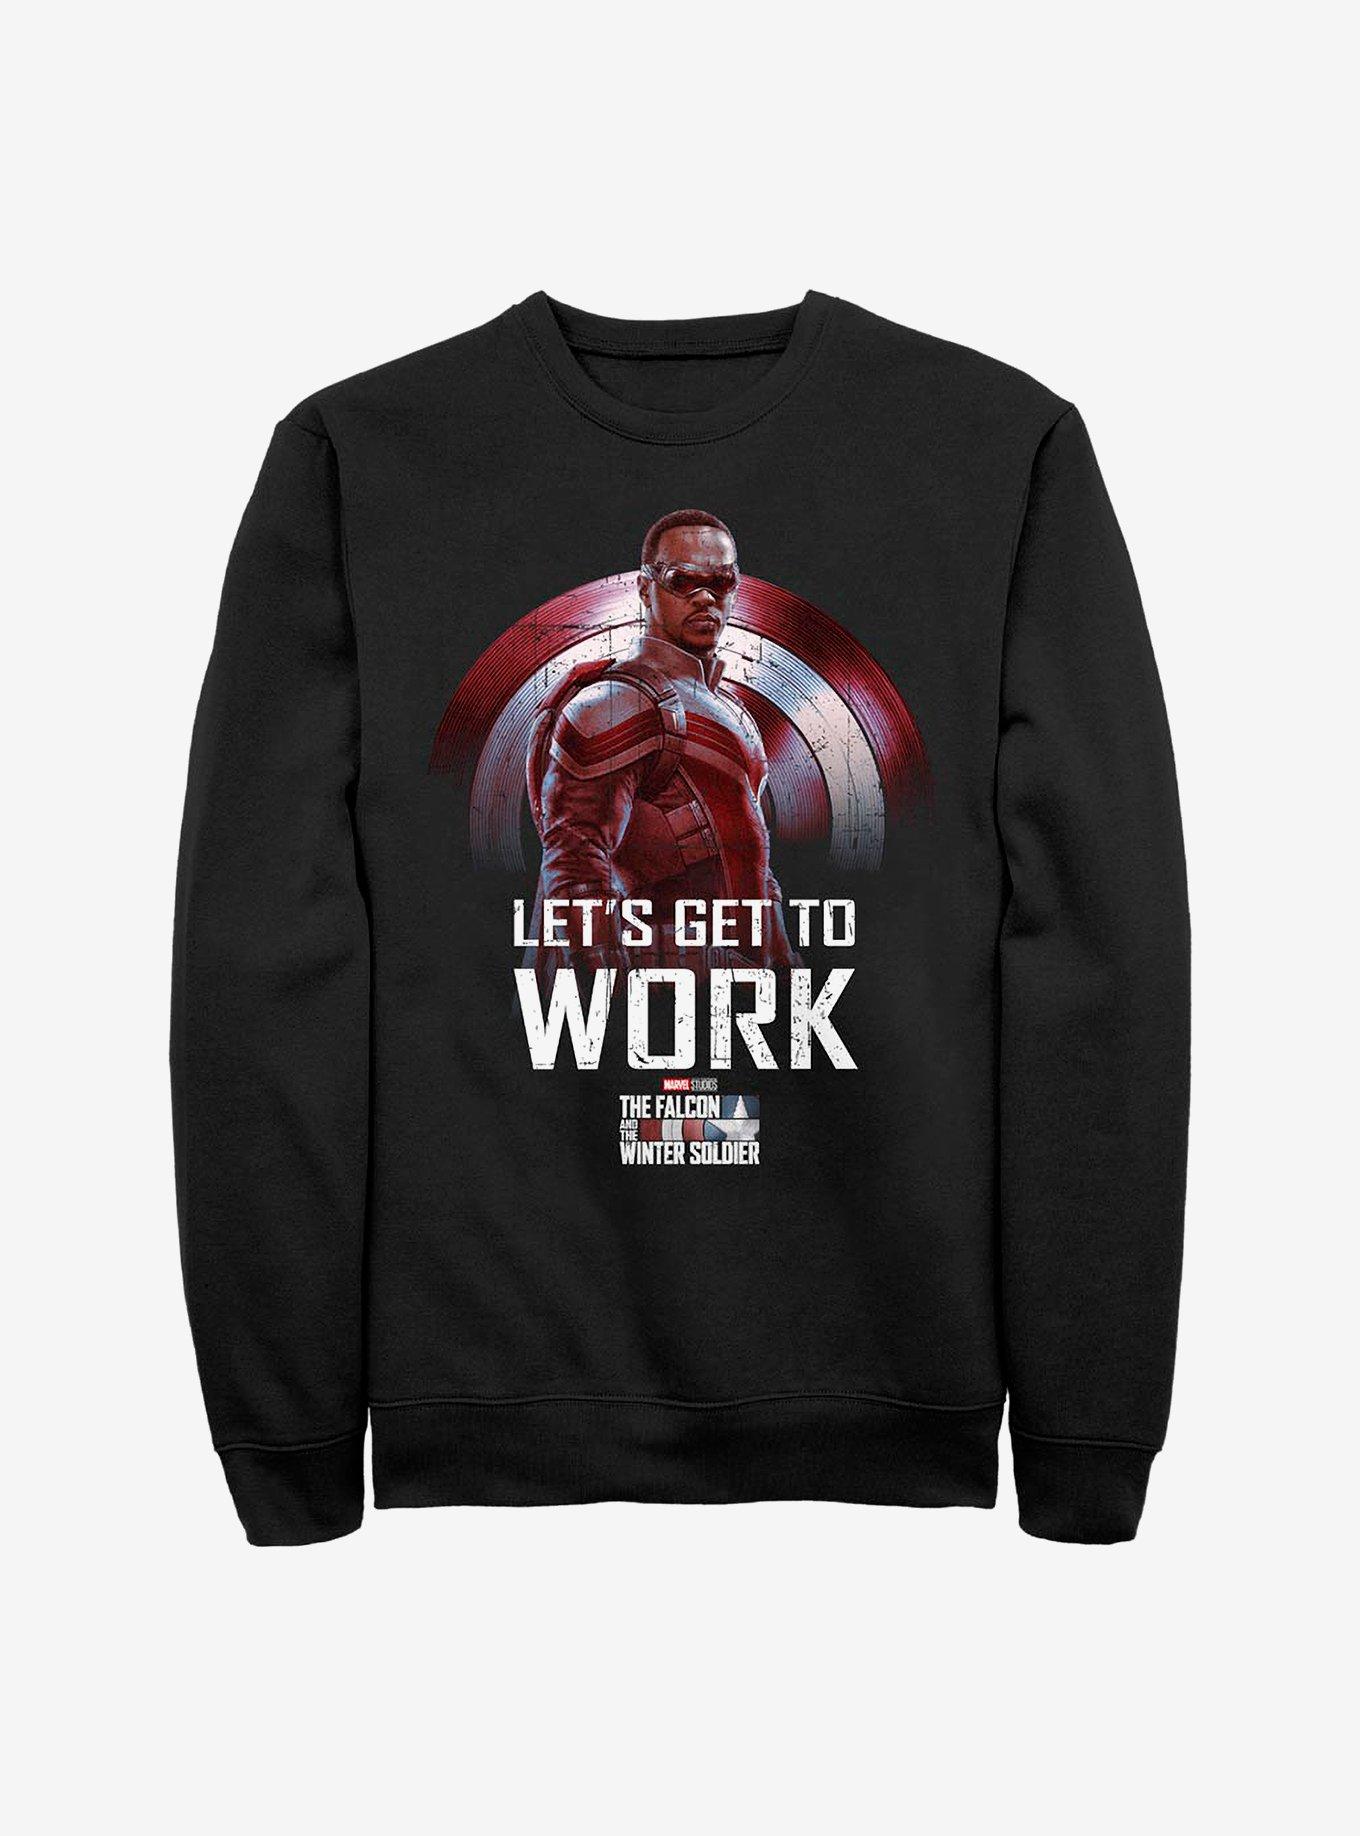 Marvel The Falcon And The Winter Soldier Let's Get To Work Crew Sweatshirt, BLACK, hi-res